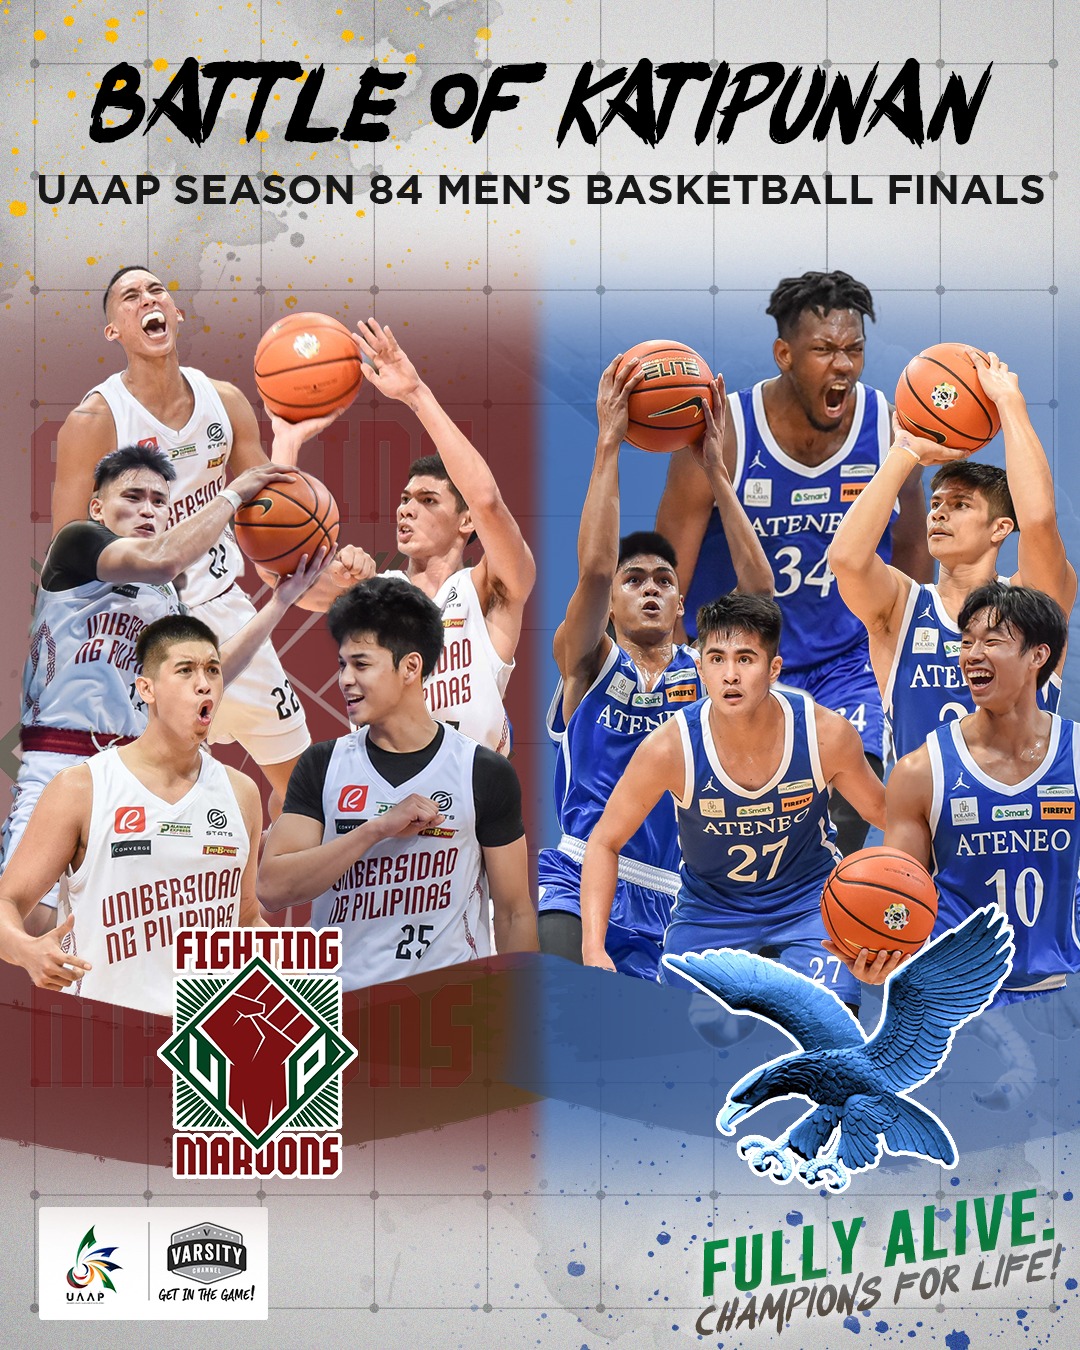 ITS OFFICIAL UP challenges defending champions Ateneo in UAAP Season 84 finals